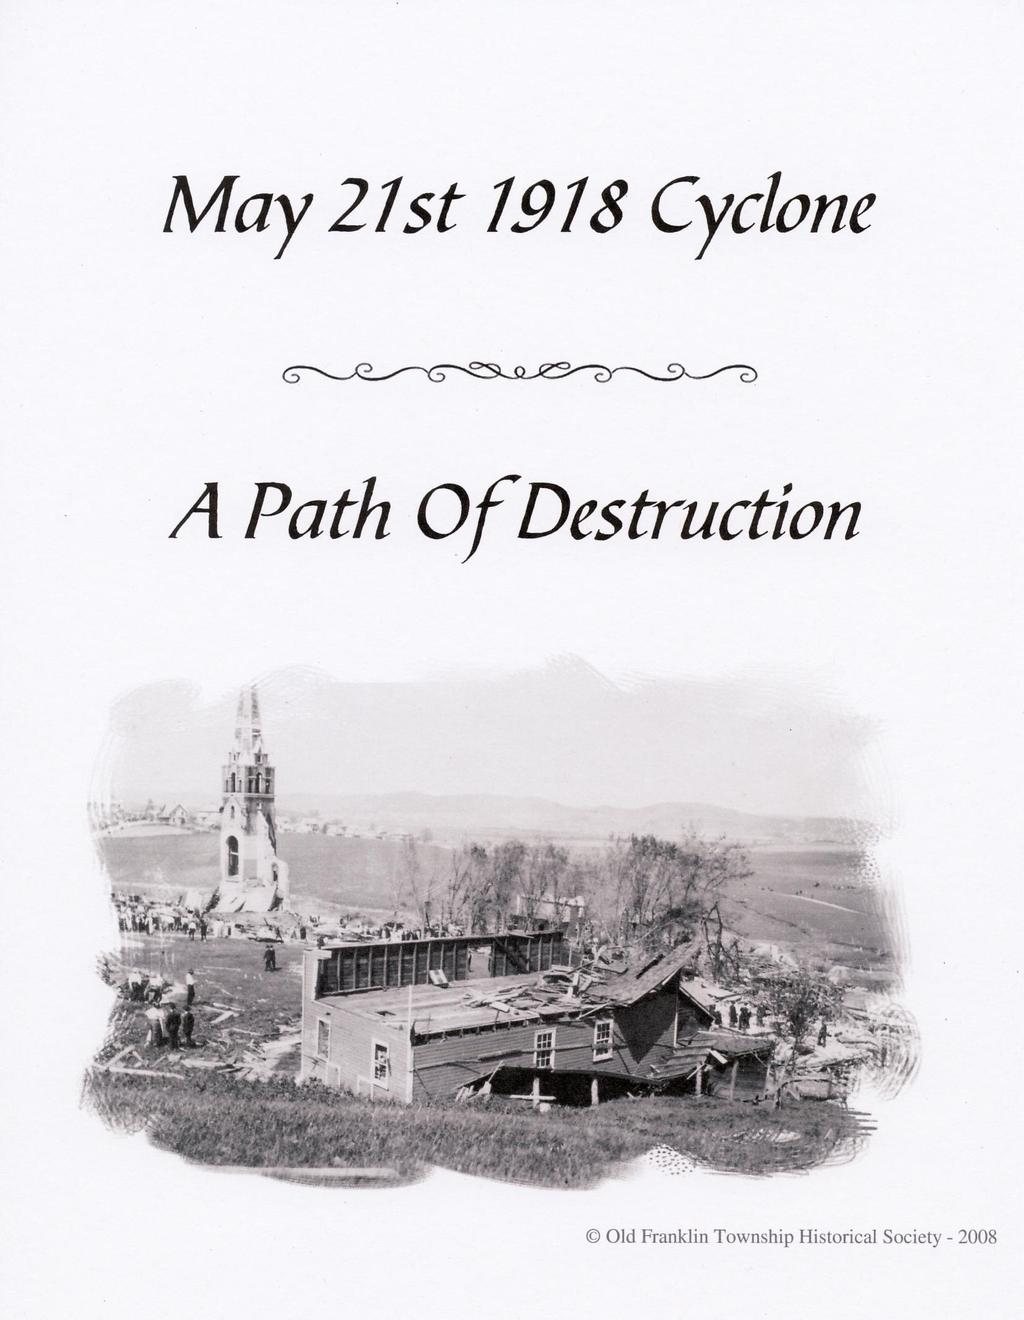 Copies of our first publication May 21st 1918 Cyclone A Path of Destruction are still available. For more information visit our website at http://www.townoffranklinhistoricalsociety.